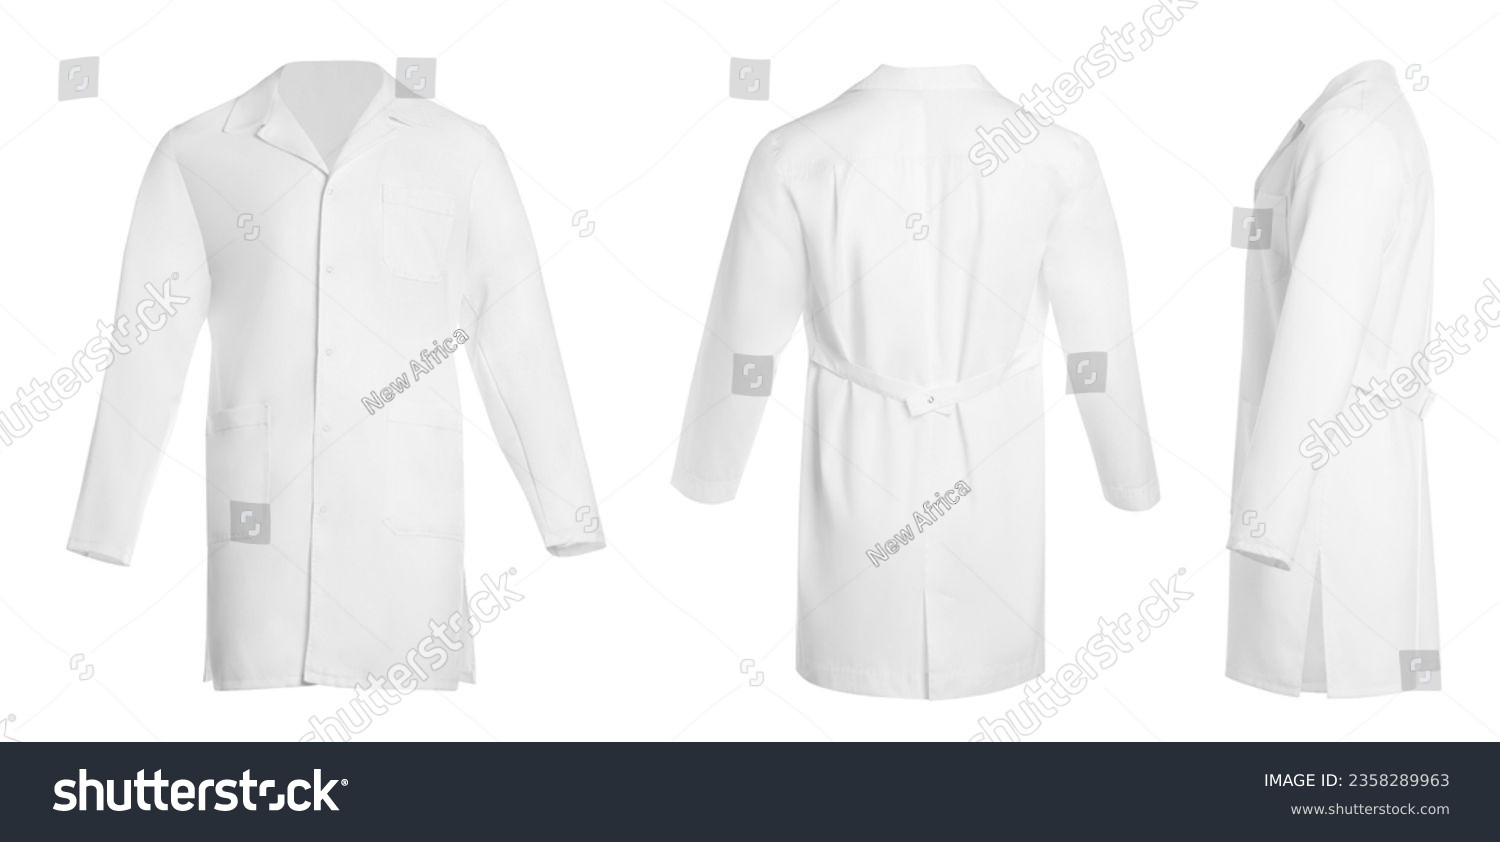 Medical uniform isolated on white, collage with back, side and front views #2358289963